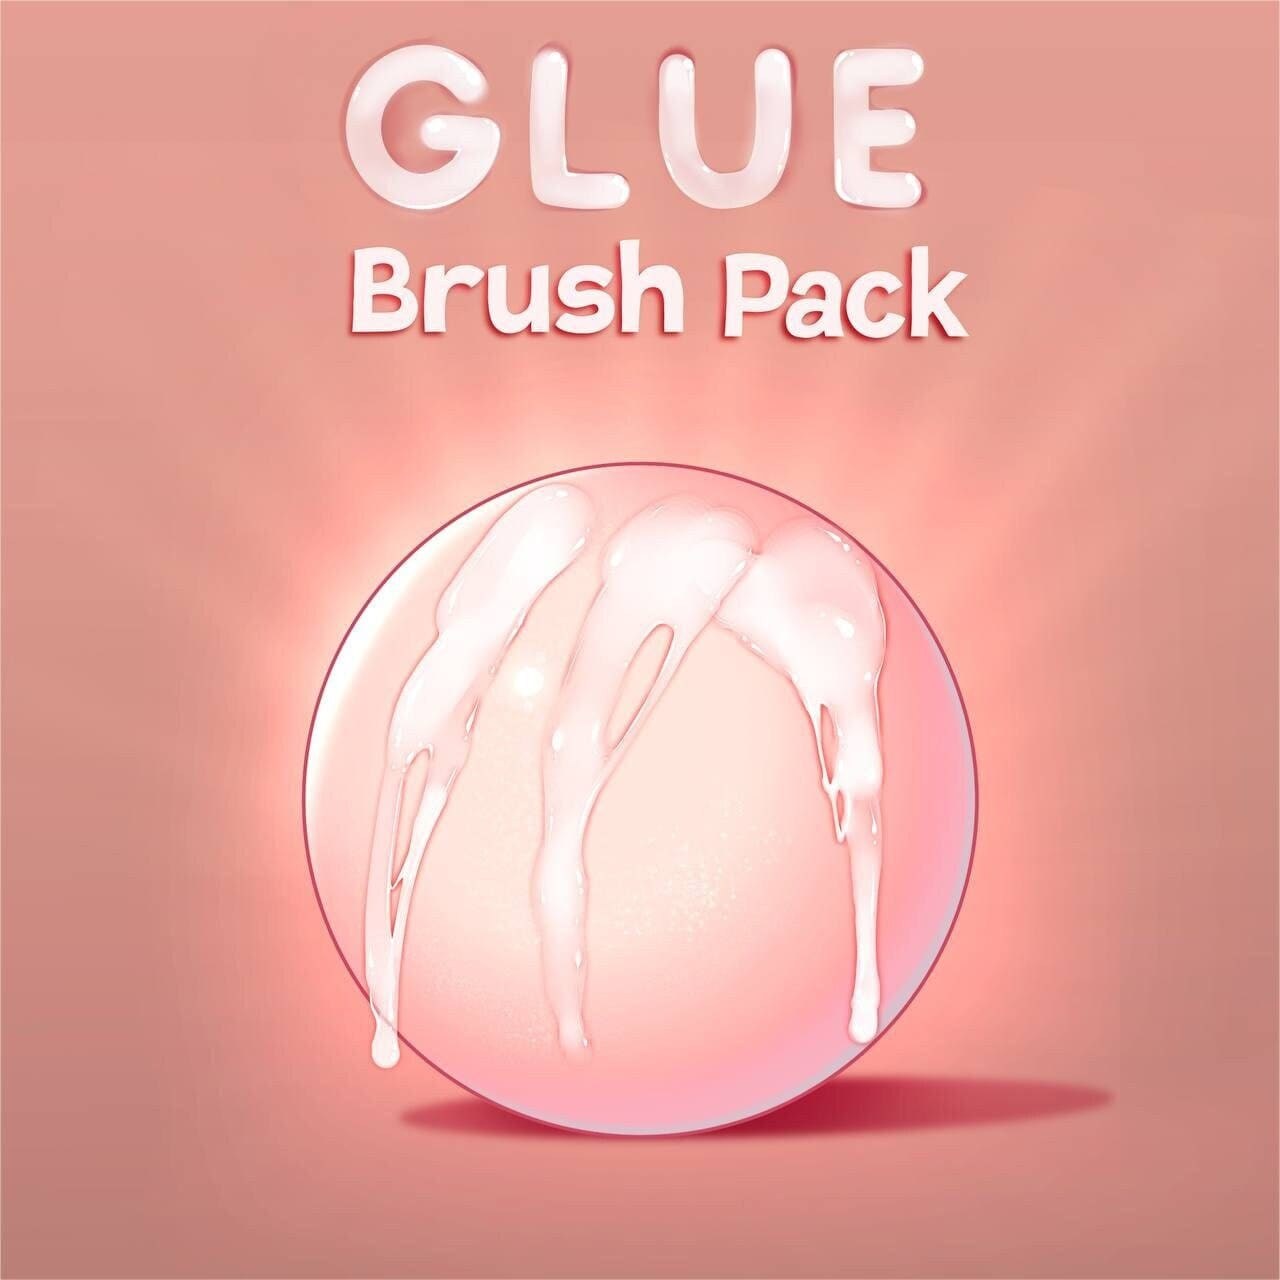 Picture of: Glue Brush Pack for Procreate – Etsy